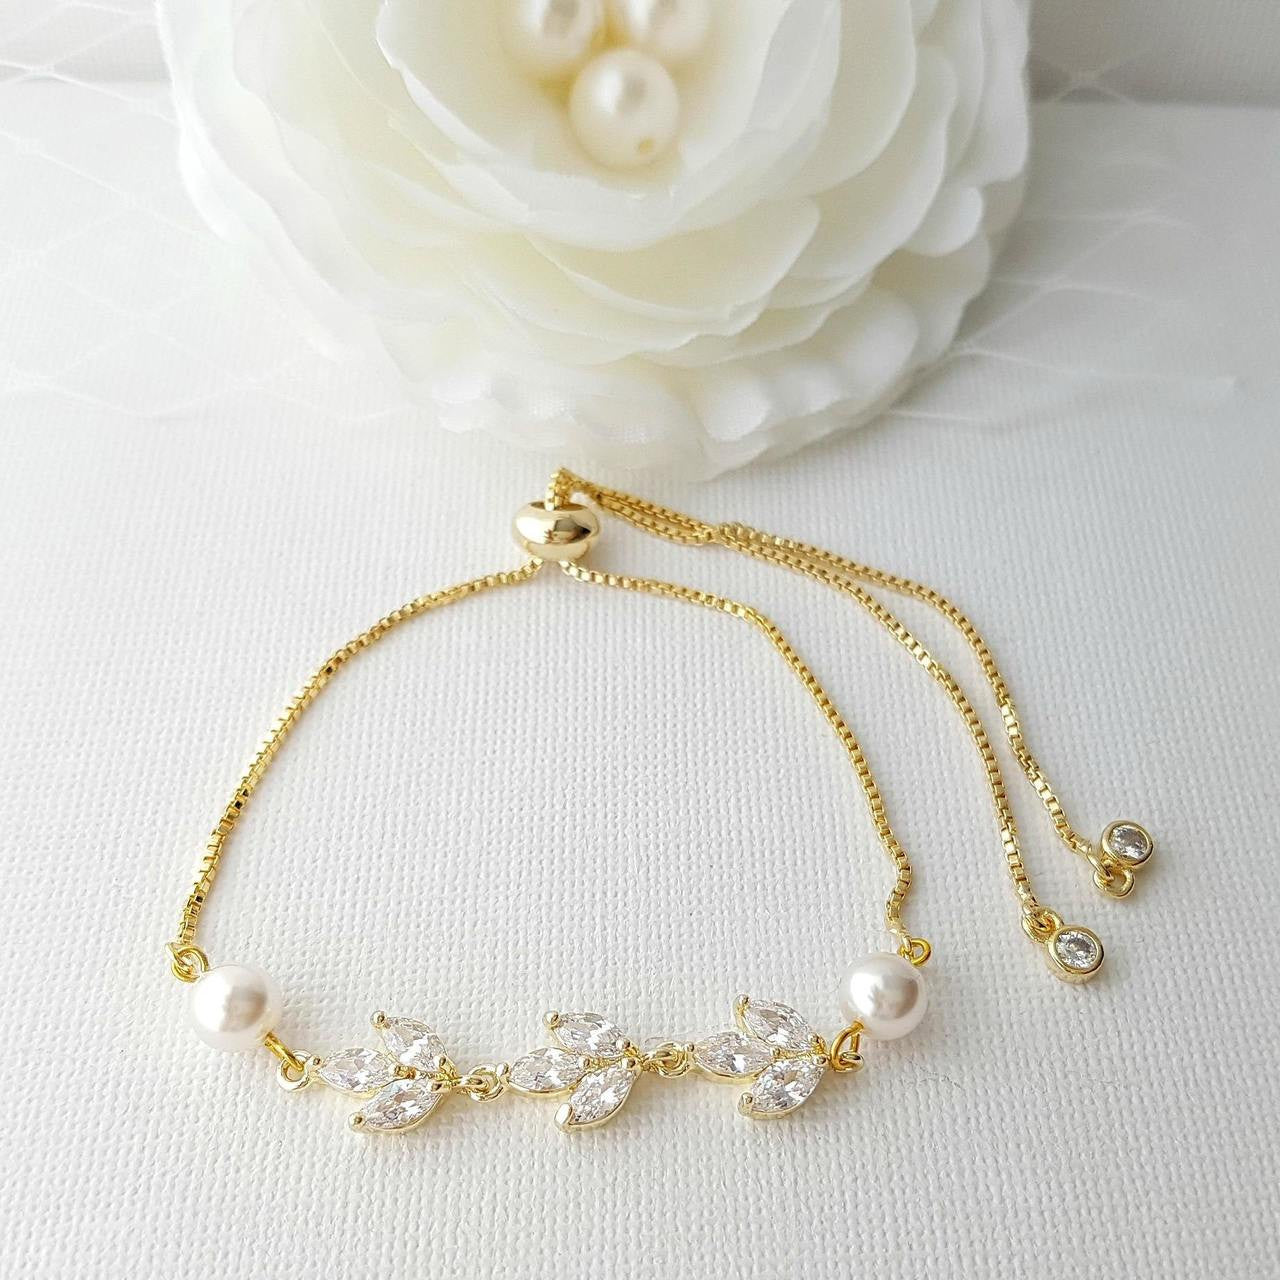 Bridal Bracelet in Rose Gold With CZ & Pearl-Leila